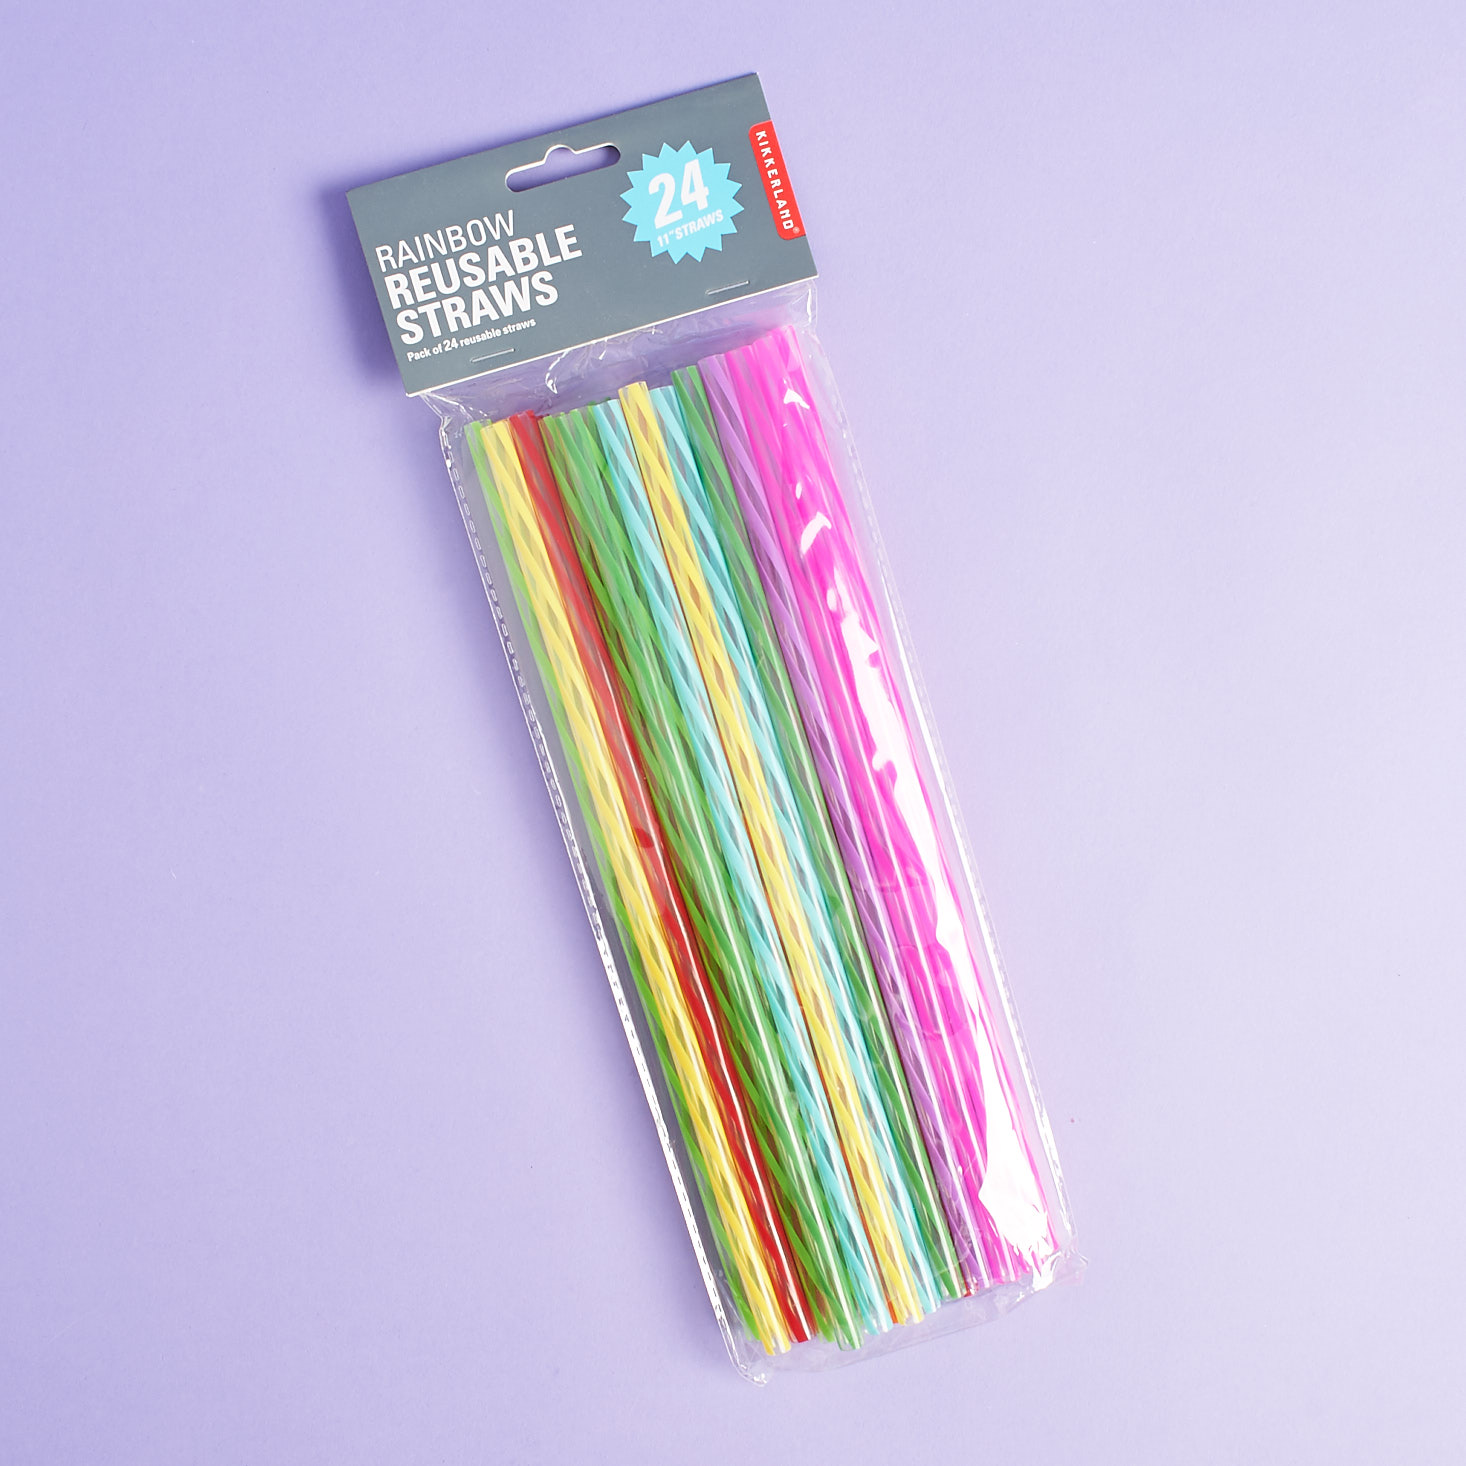 Kikkerland Rainbow Re-usable Straws in package